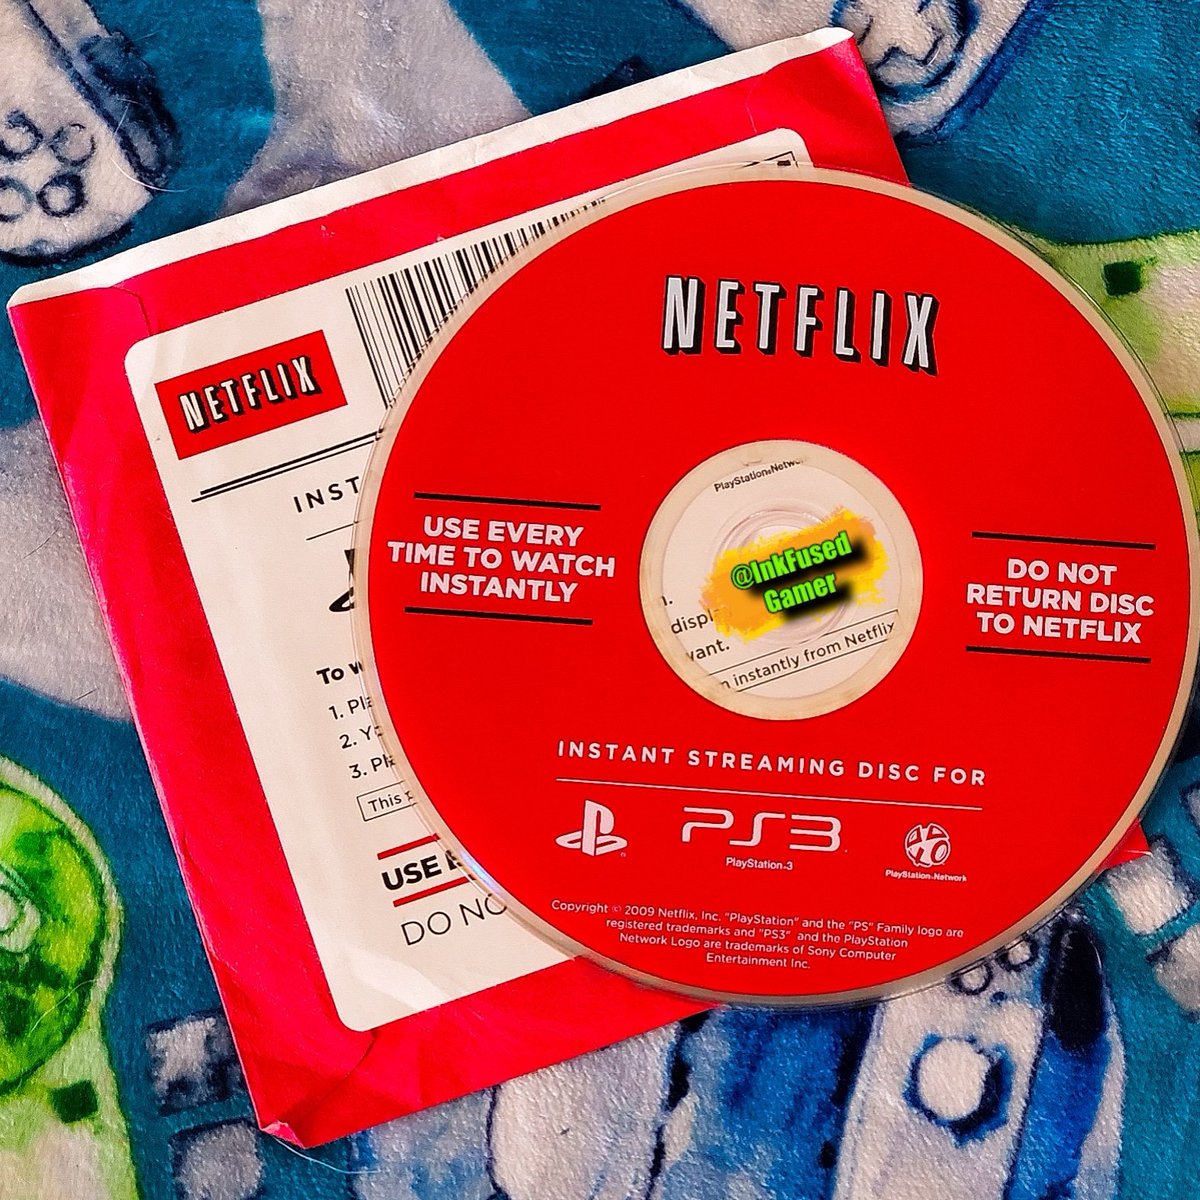 Anyone remember when you needed a disc to stream @netflix? 

#InkFusedGamer #Playstation #PS3 #Netflix #DVD #netflixandchill #gaminghistory #media #Playstation3 #streaming #bluray #Sony #streamingservice